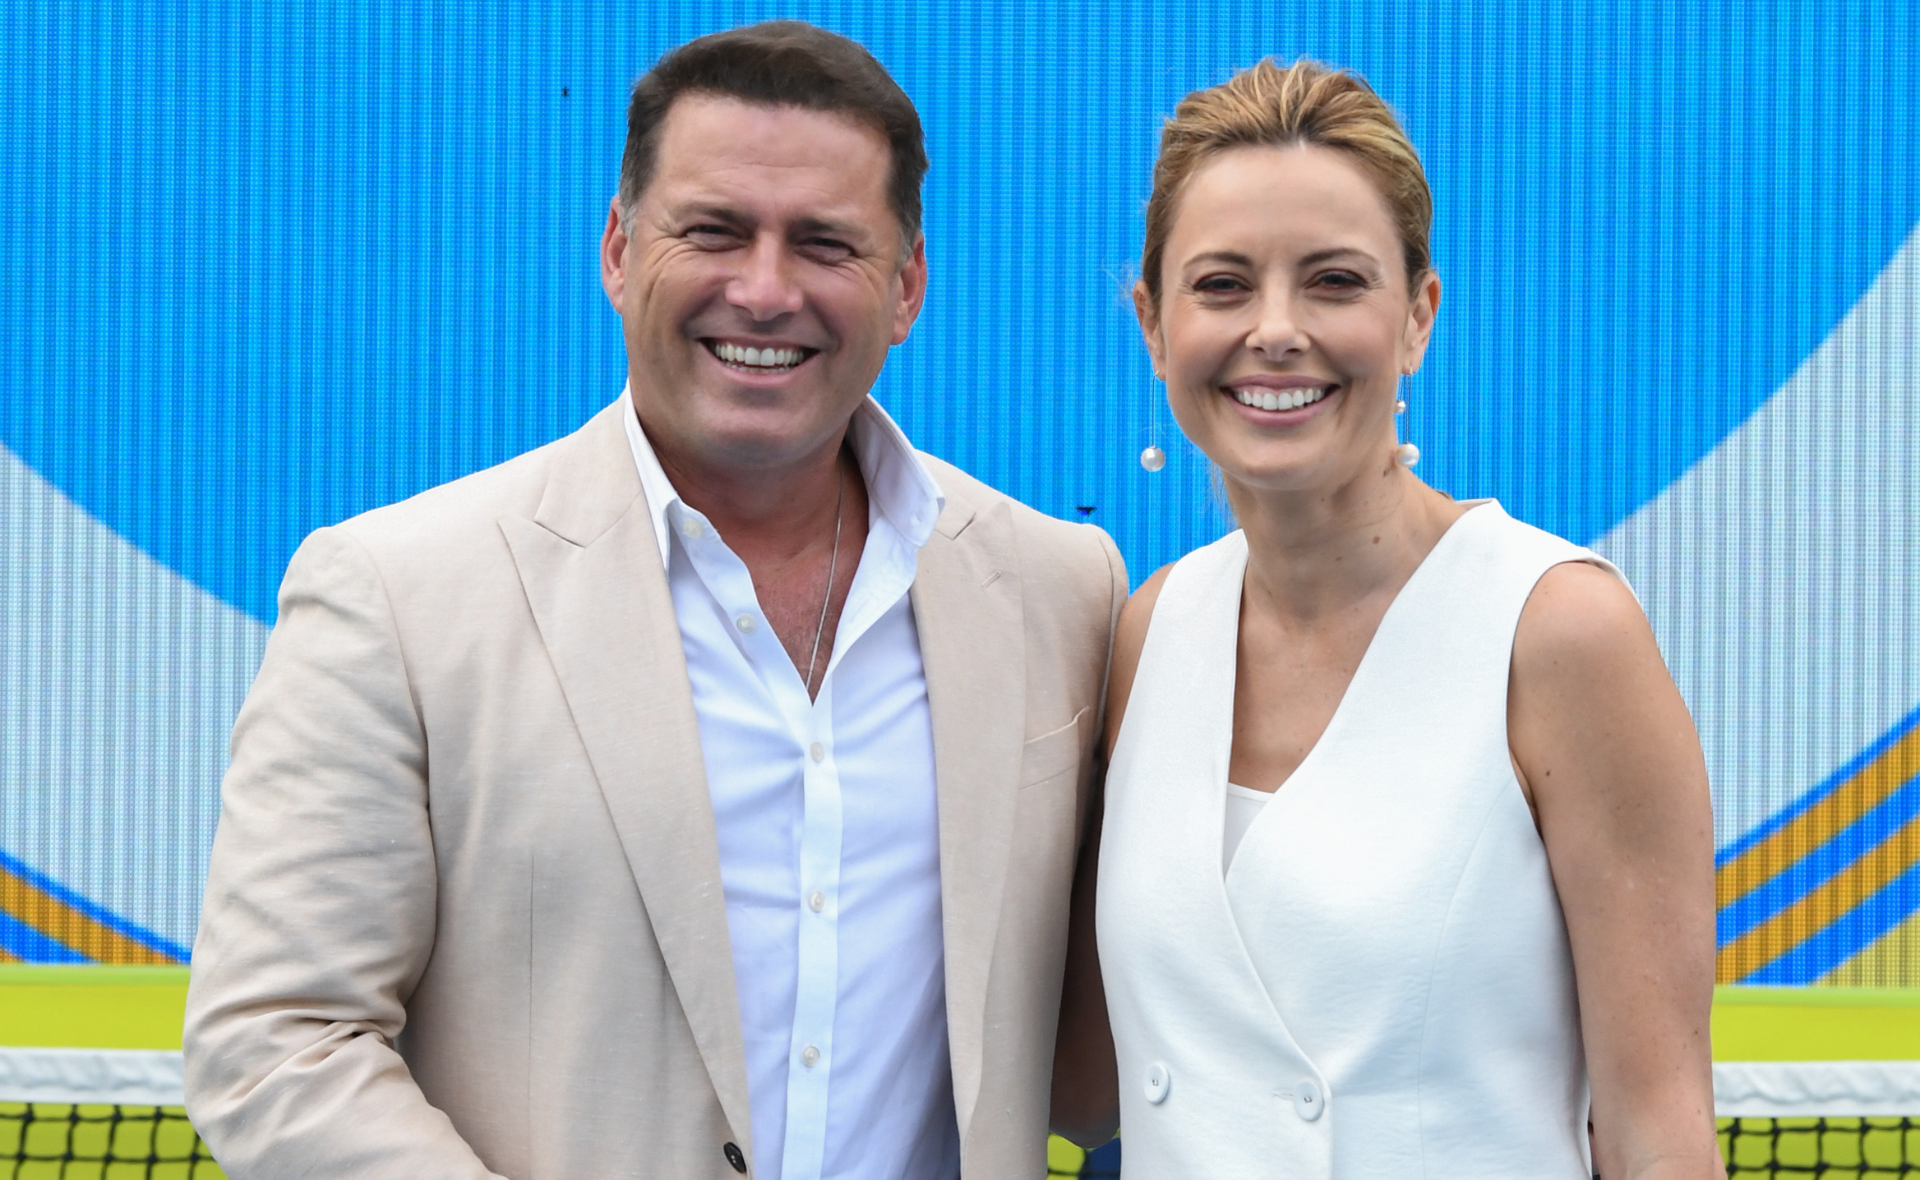 Karl Stefanovic feels “overlooked” after the shake ups occurring at Today